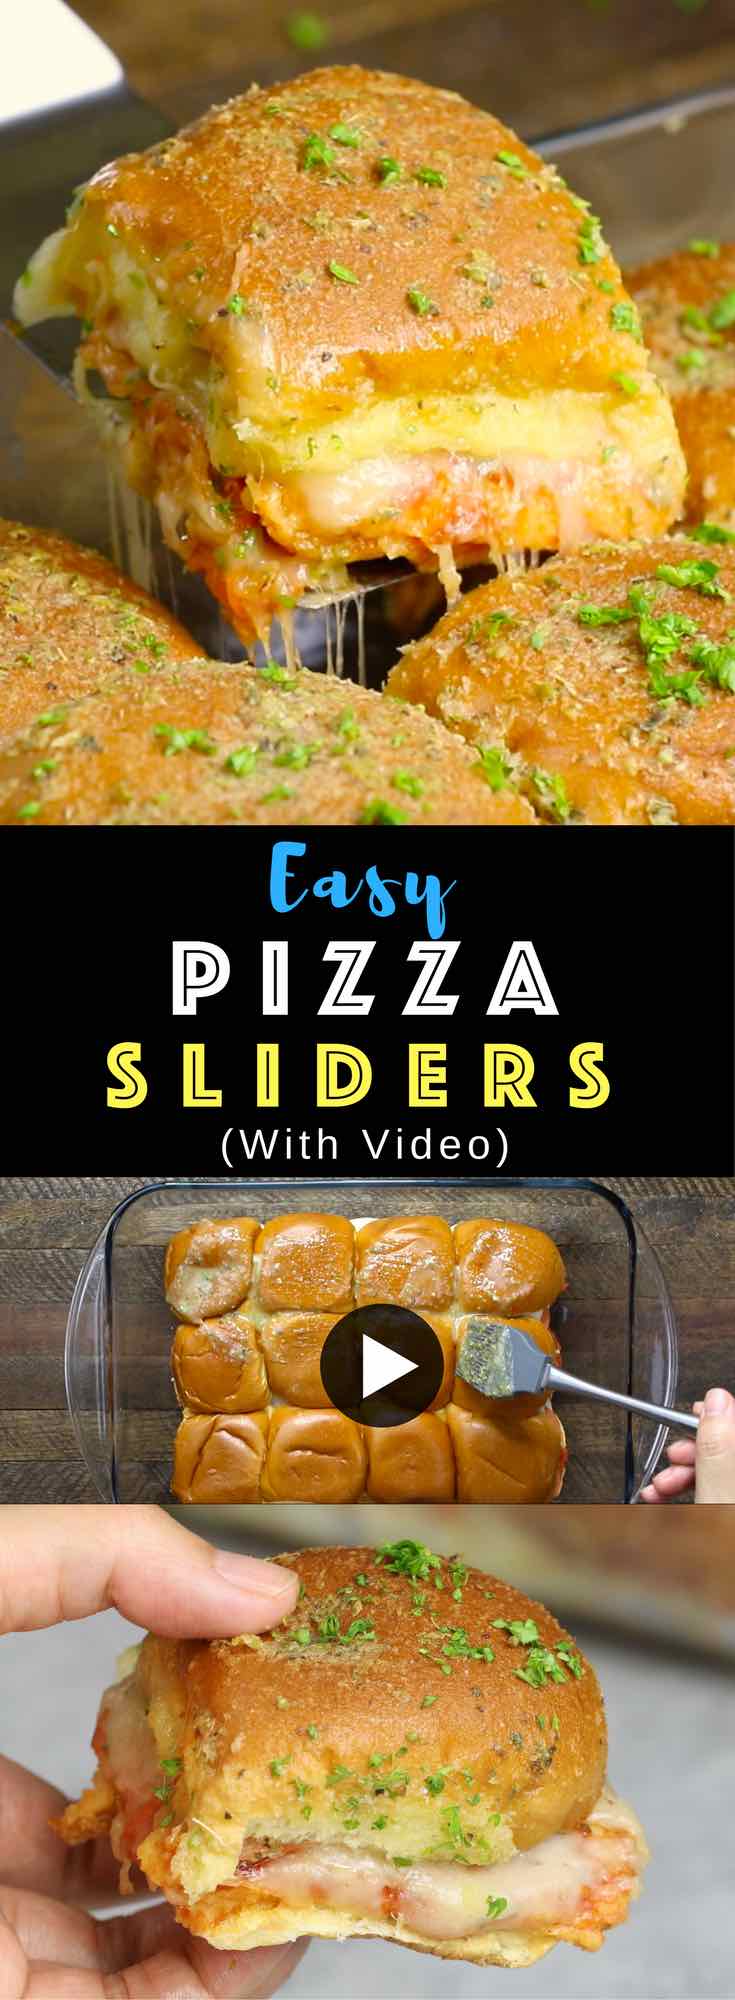 Easy Pepperoni Pizza Sliders – A Make-ahead recipe that’s a guaranteed hit with the crispy topping on the bread and cheesy filings inside. All you need is some simple ingredients: Hawaiian rolls, cheese, pepperoni, pasta sauce, butter, herbs and Parmesan.